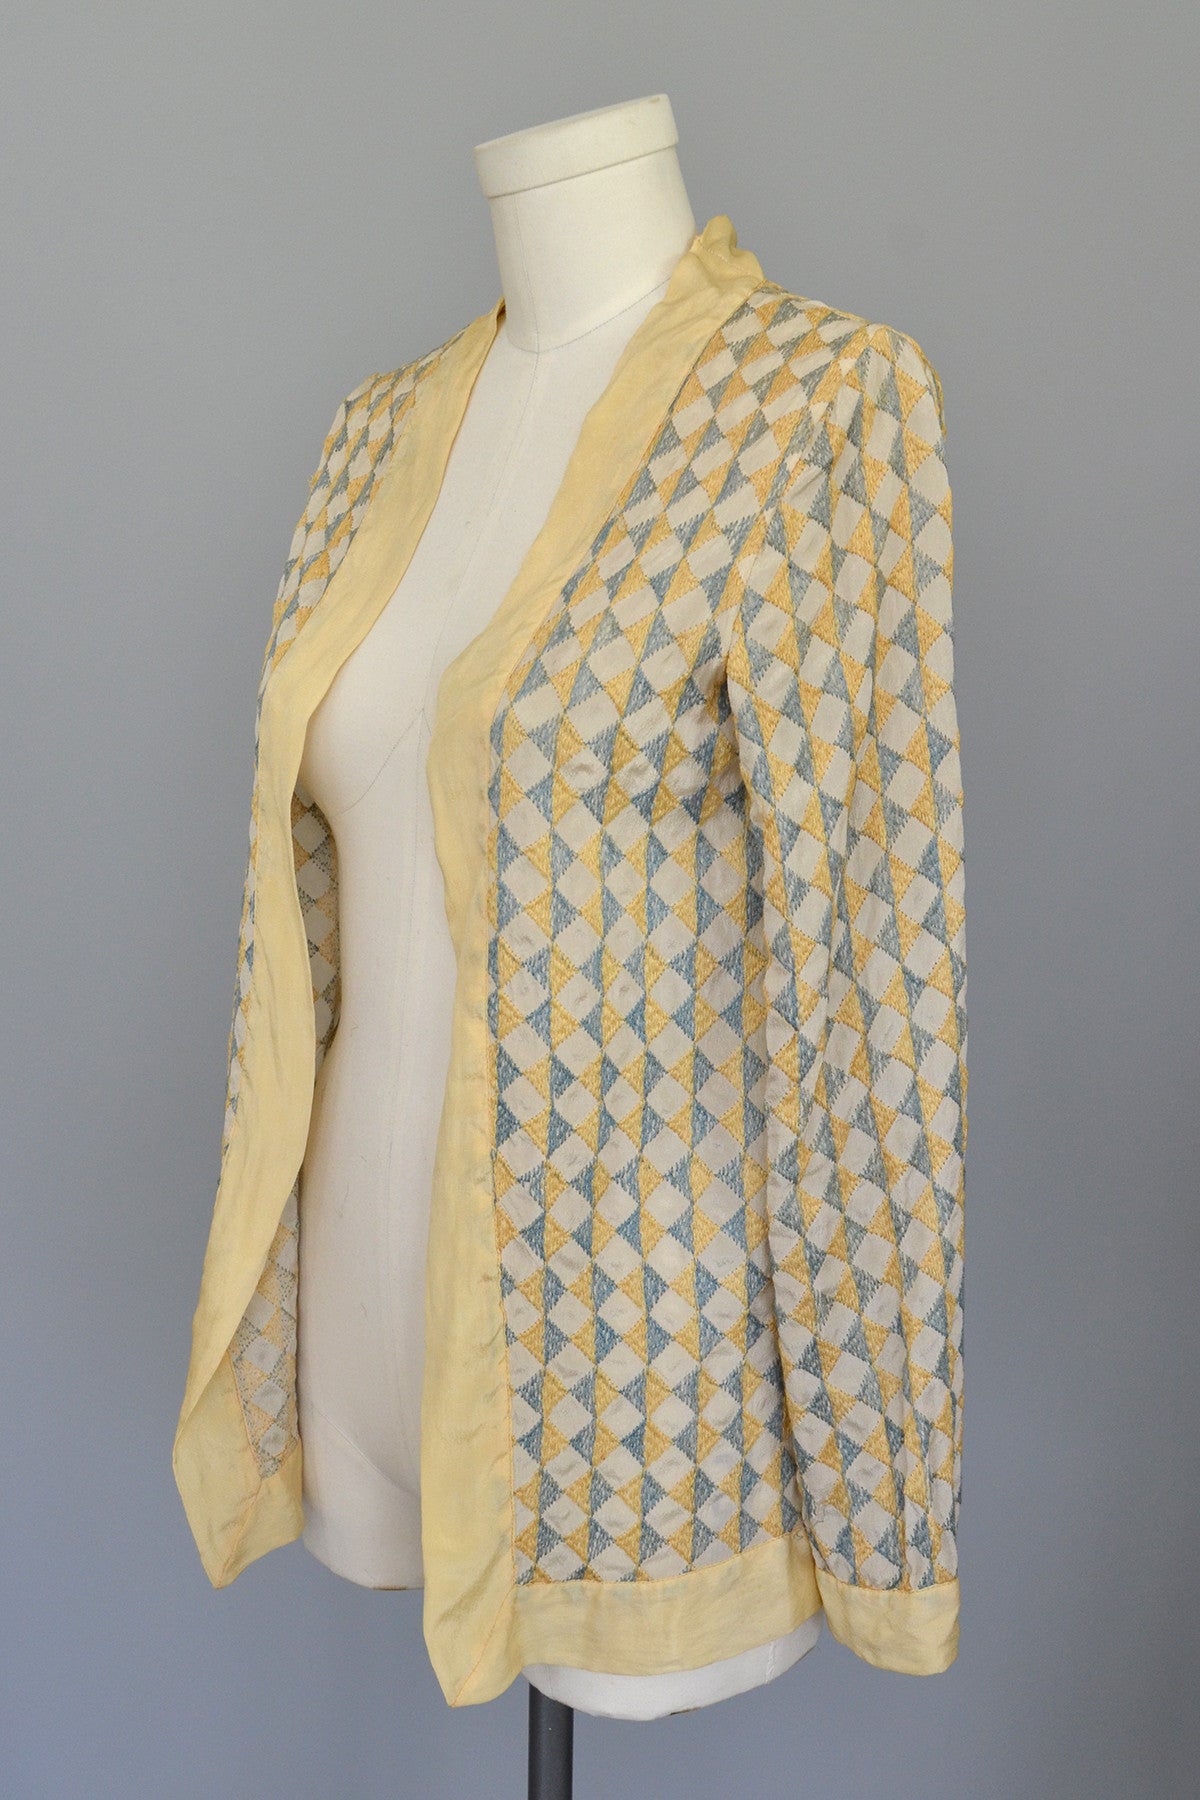 RESERVED 1920s Deco Harlequin Embroidered Jacket Duster